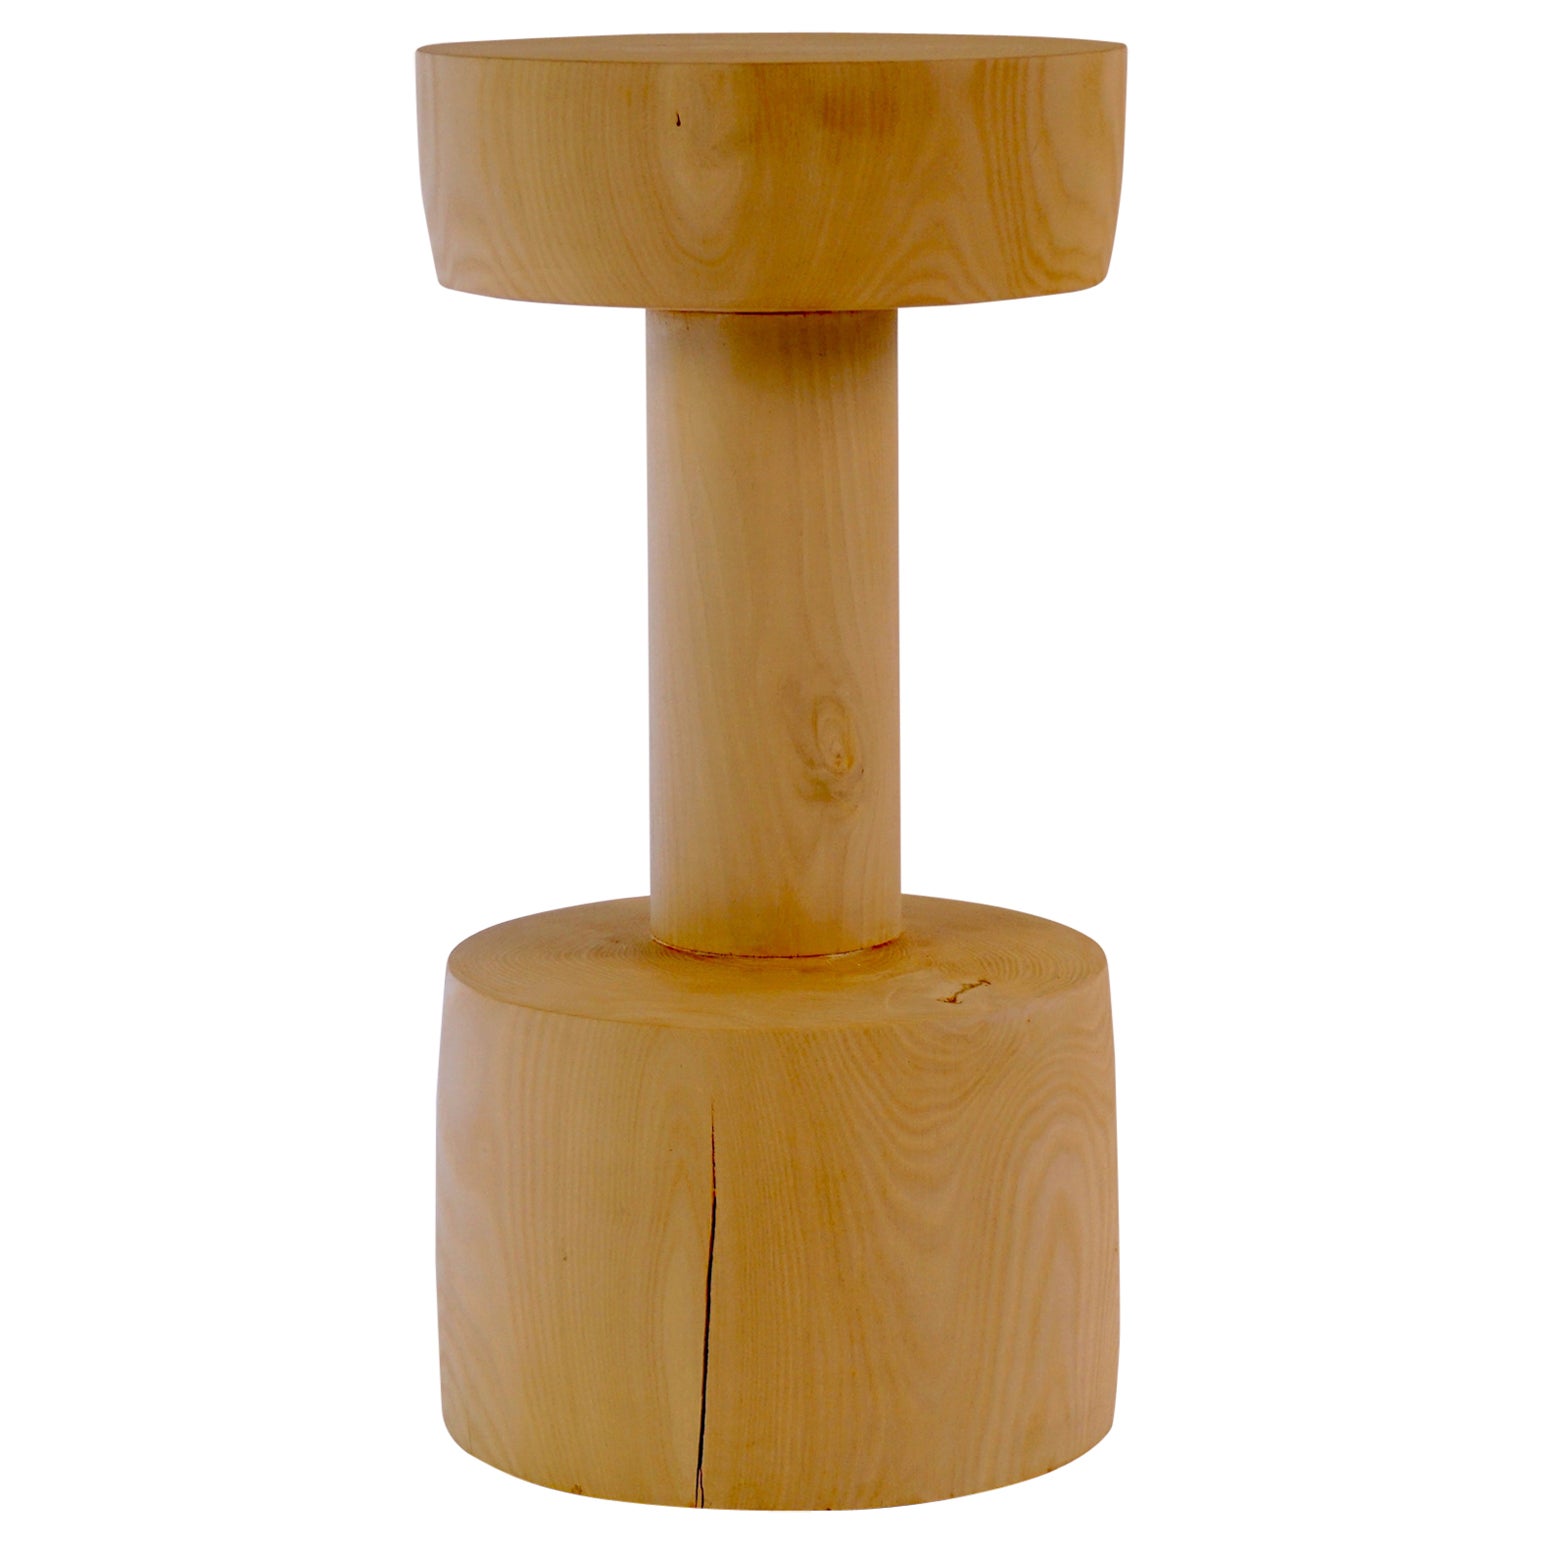 Turned Wooden Pedestal #14 in Bleached Catalpa For Sale